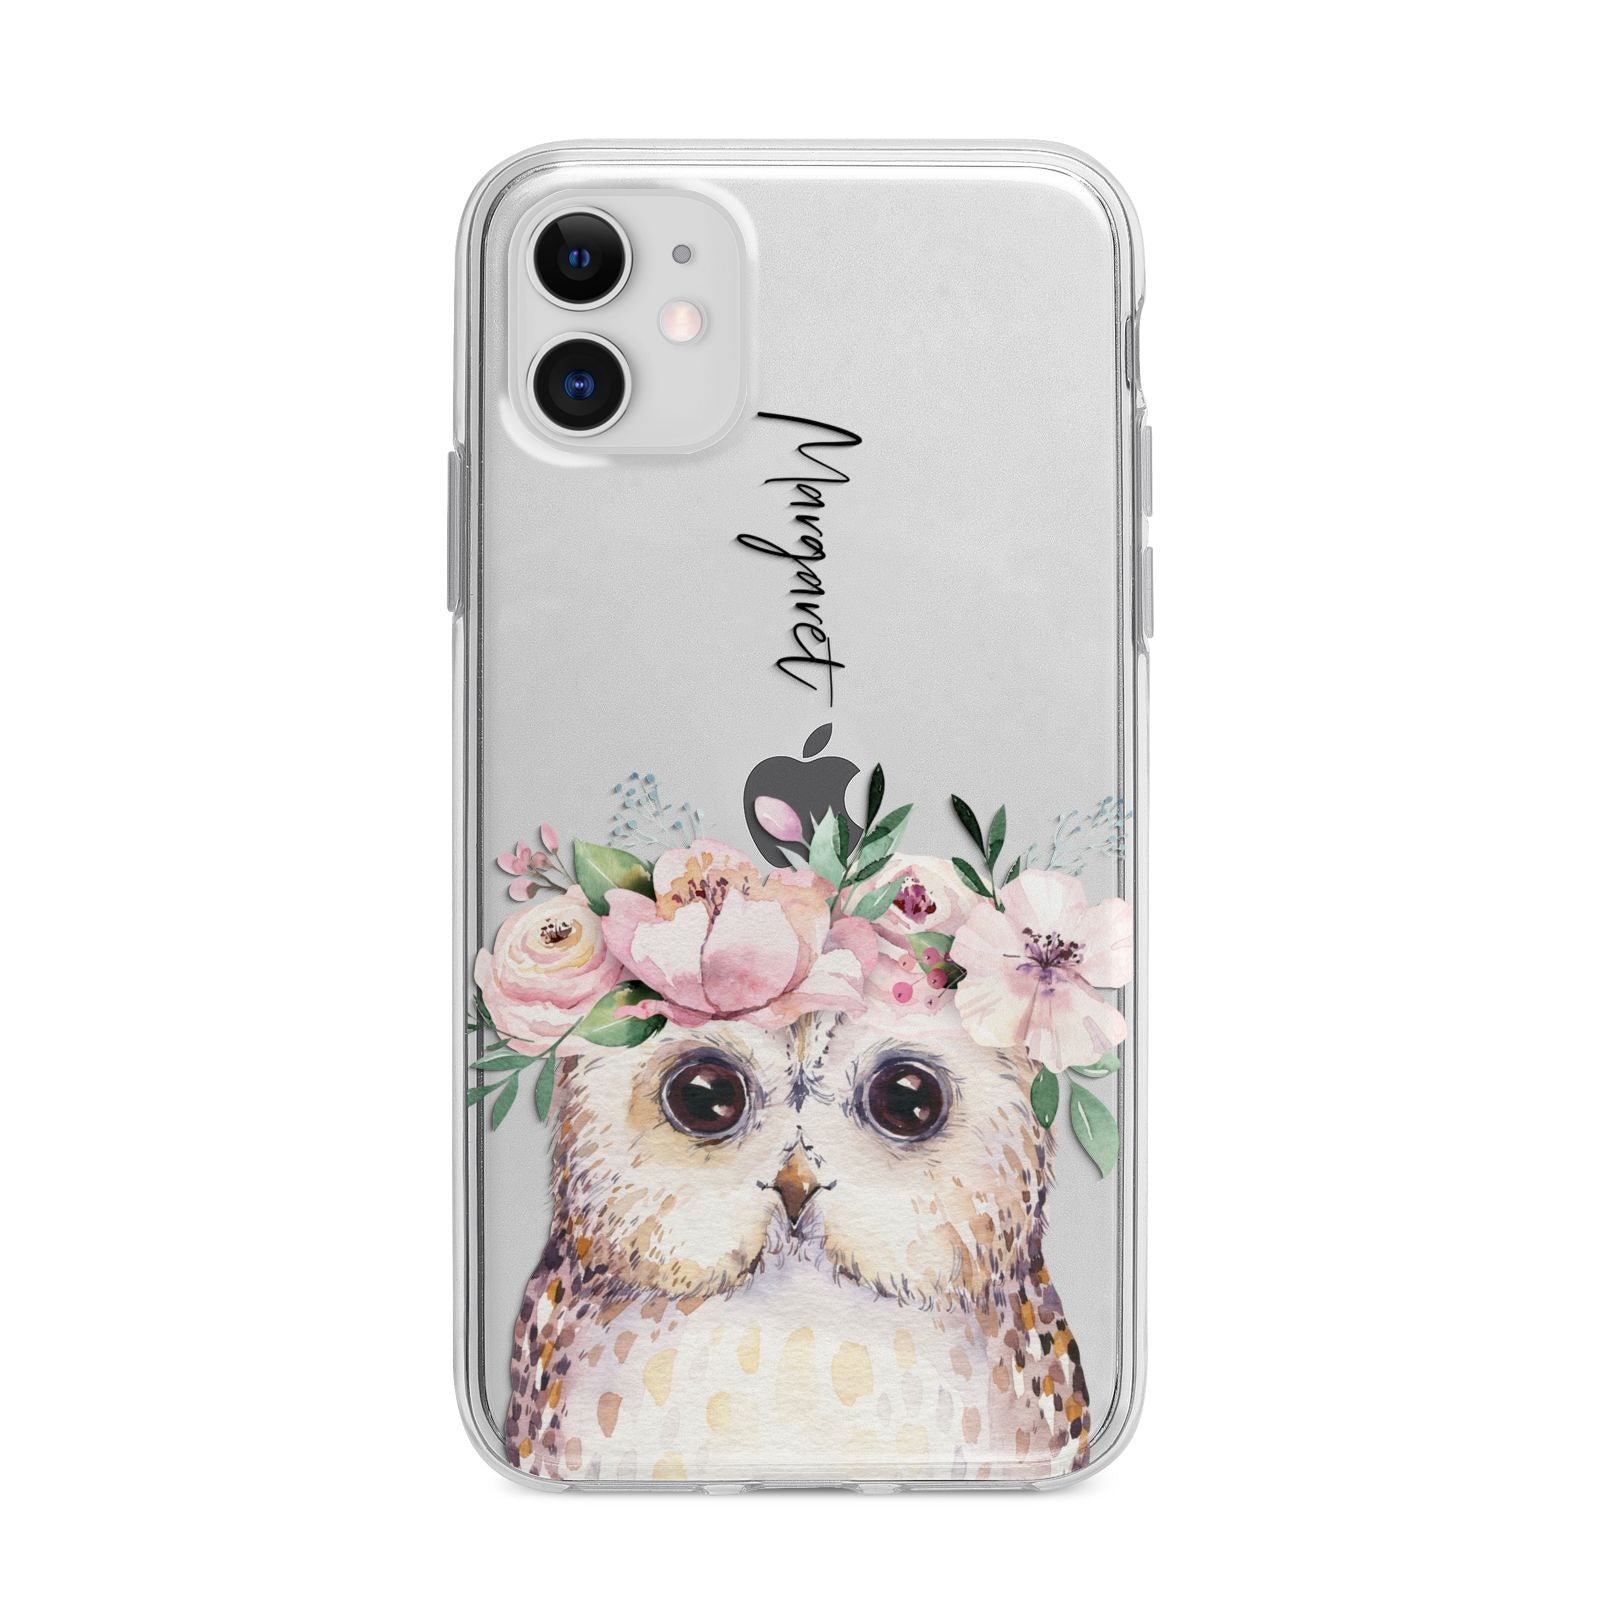 Personalised Name Owl Apple iPhone 11 in White with Bumper Case